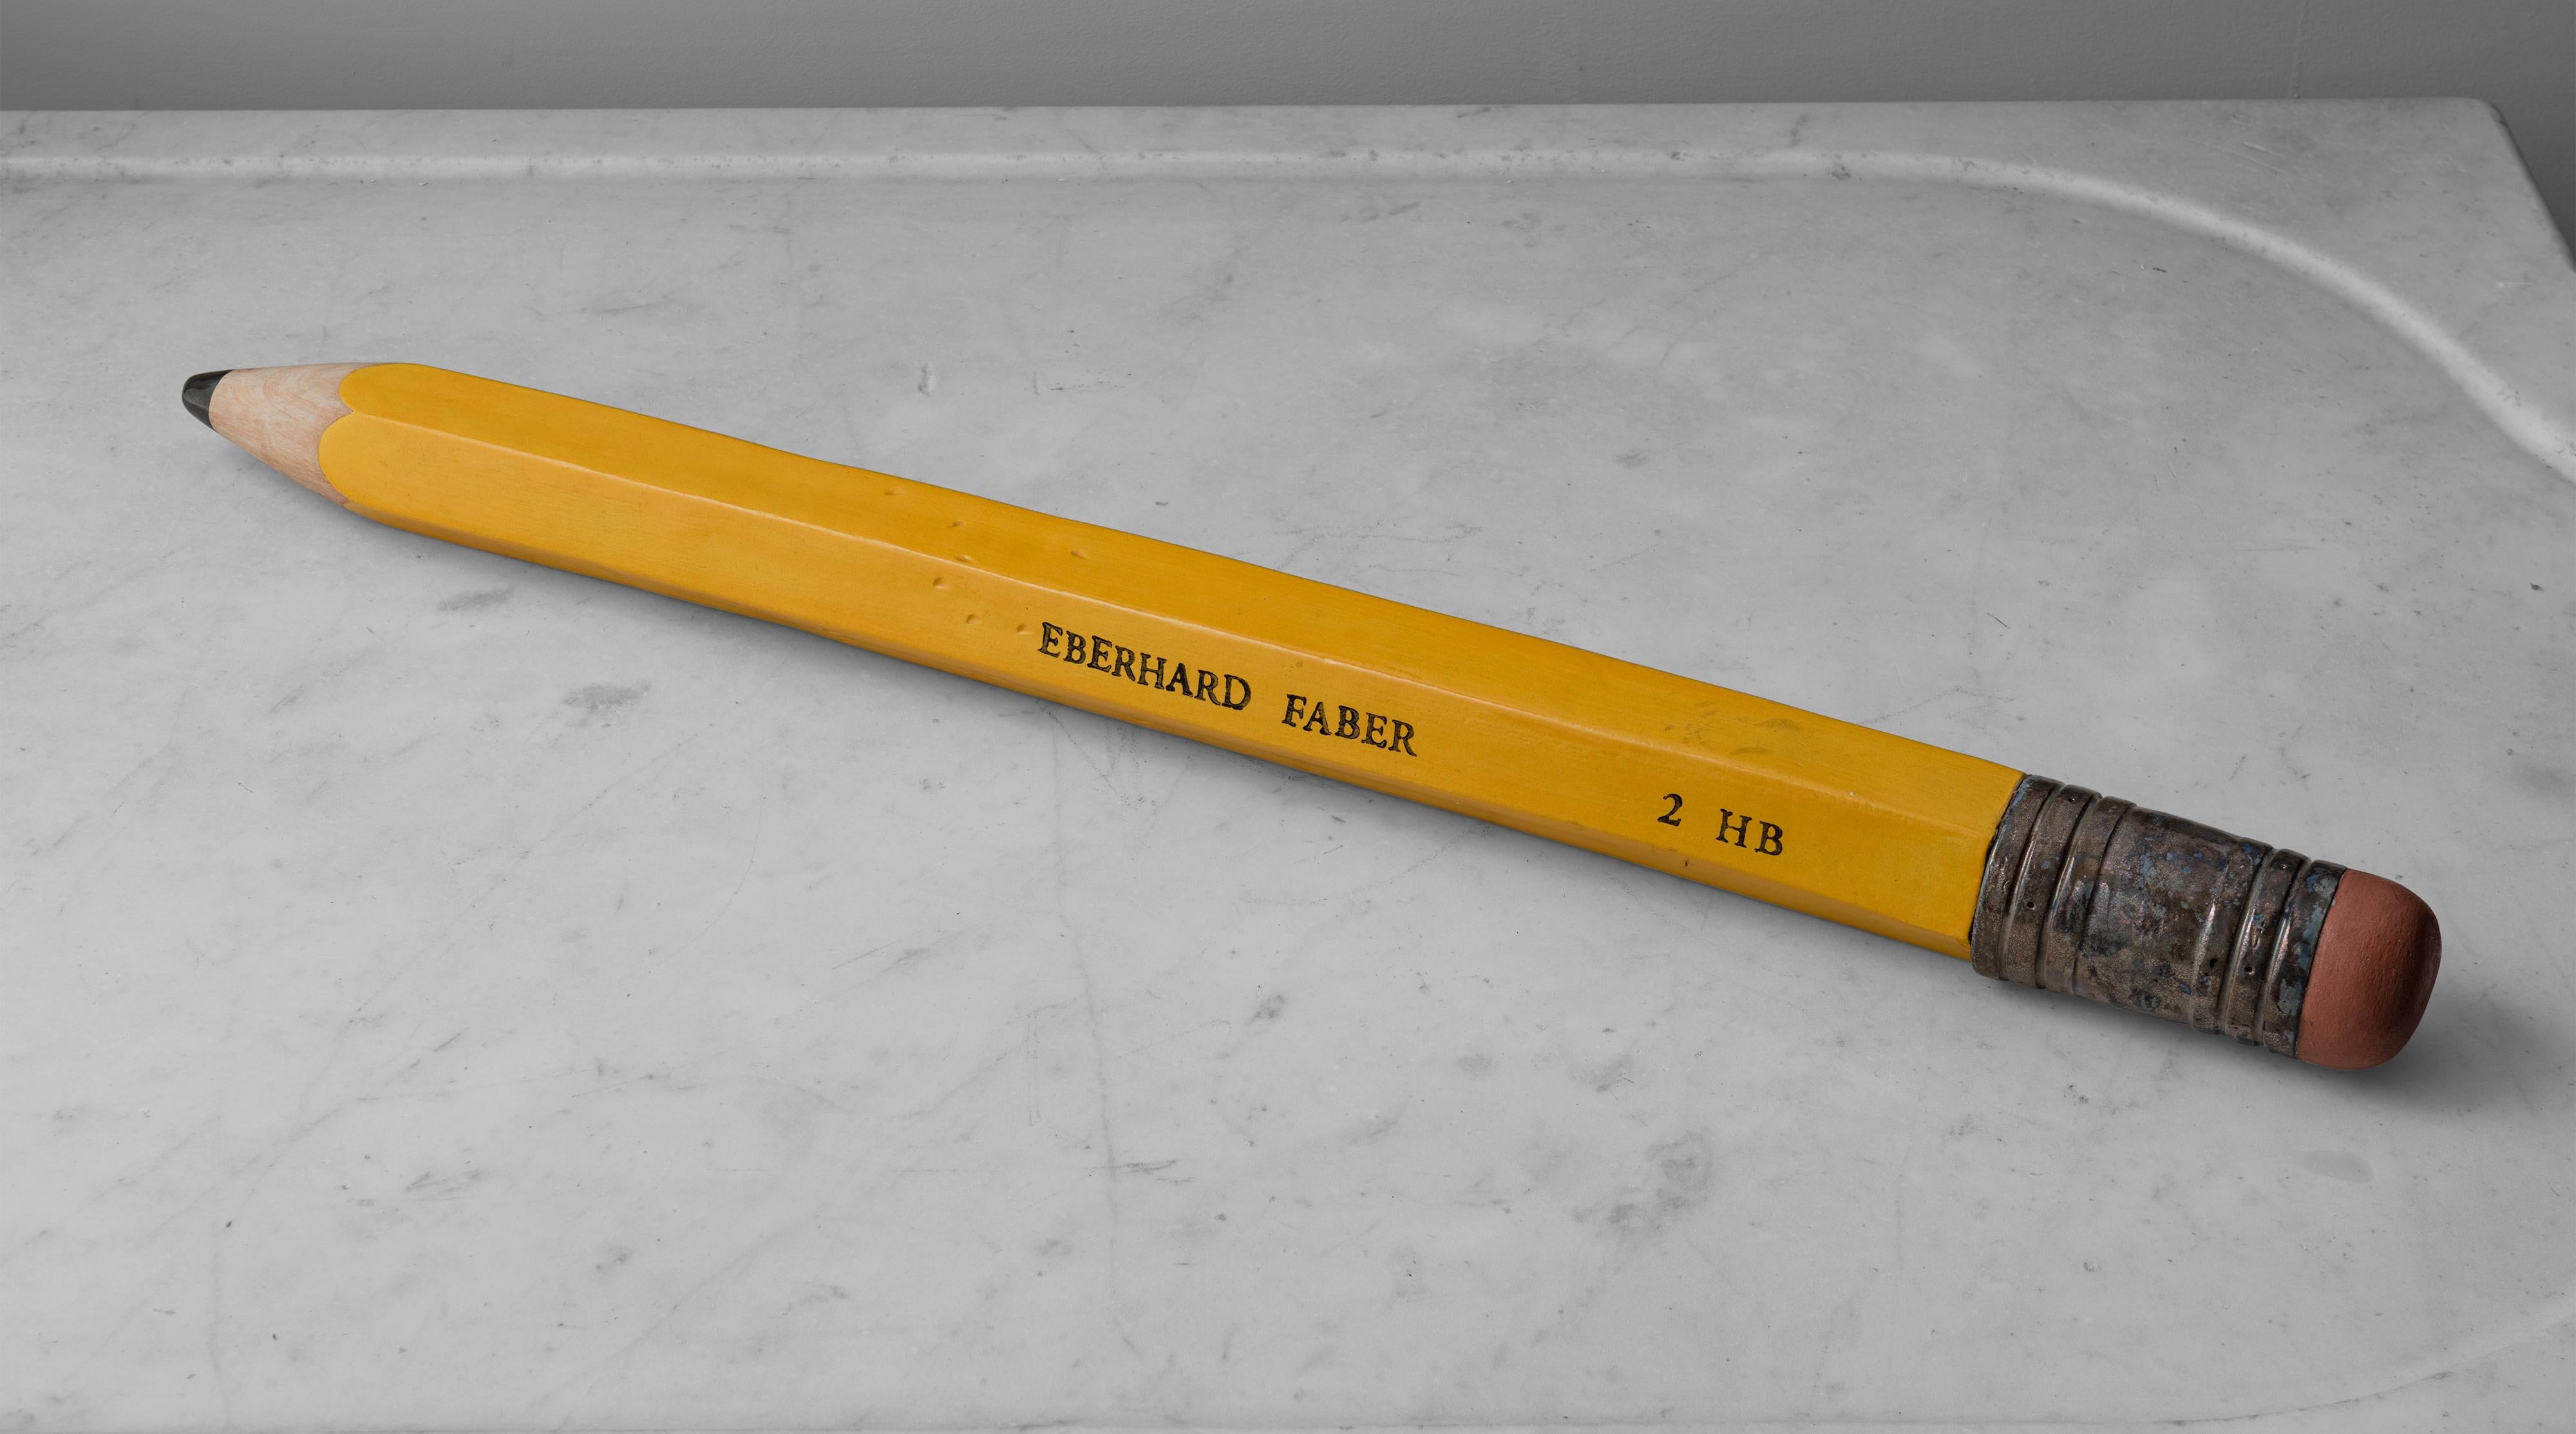 Eberhard Faber pencil sculpture by Karen Shapiro, America 21st C.

Pop art sculpture with incredible attention to detail, worn pencil tip, eraser and 